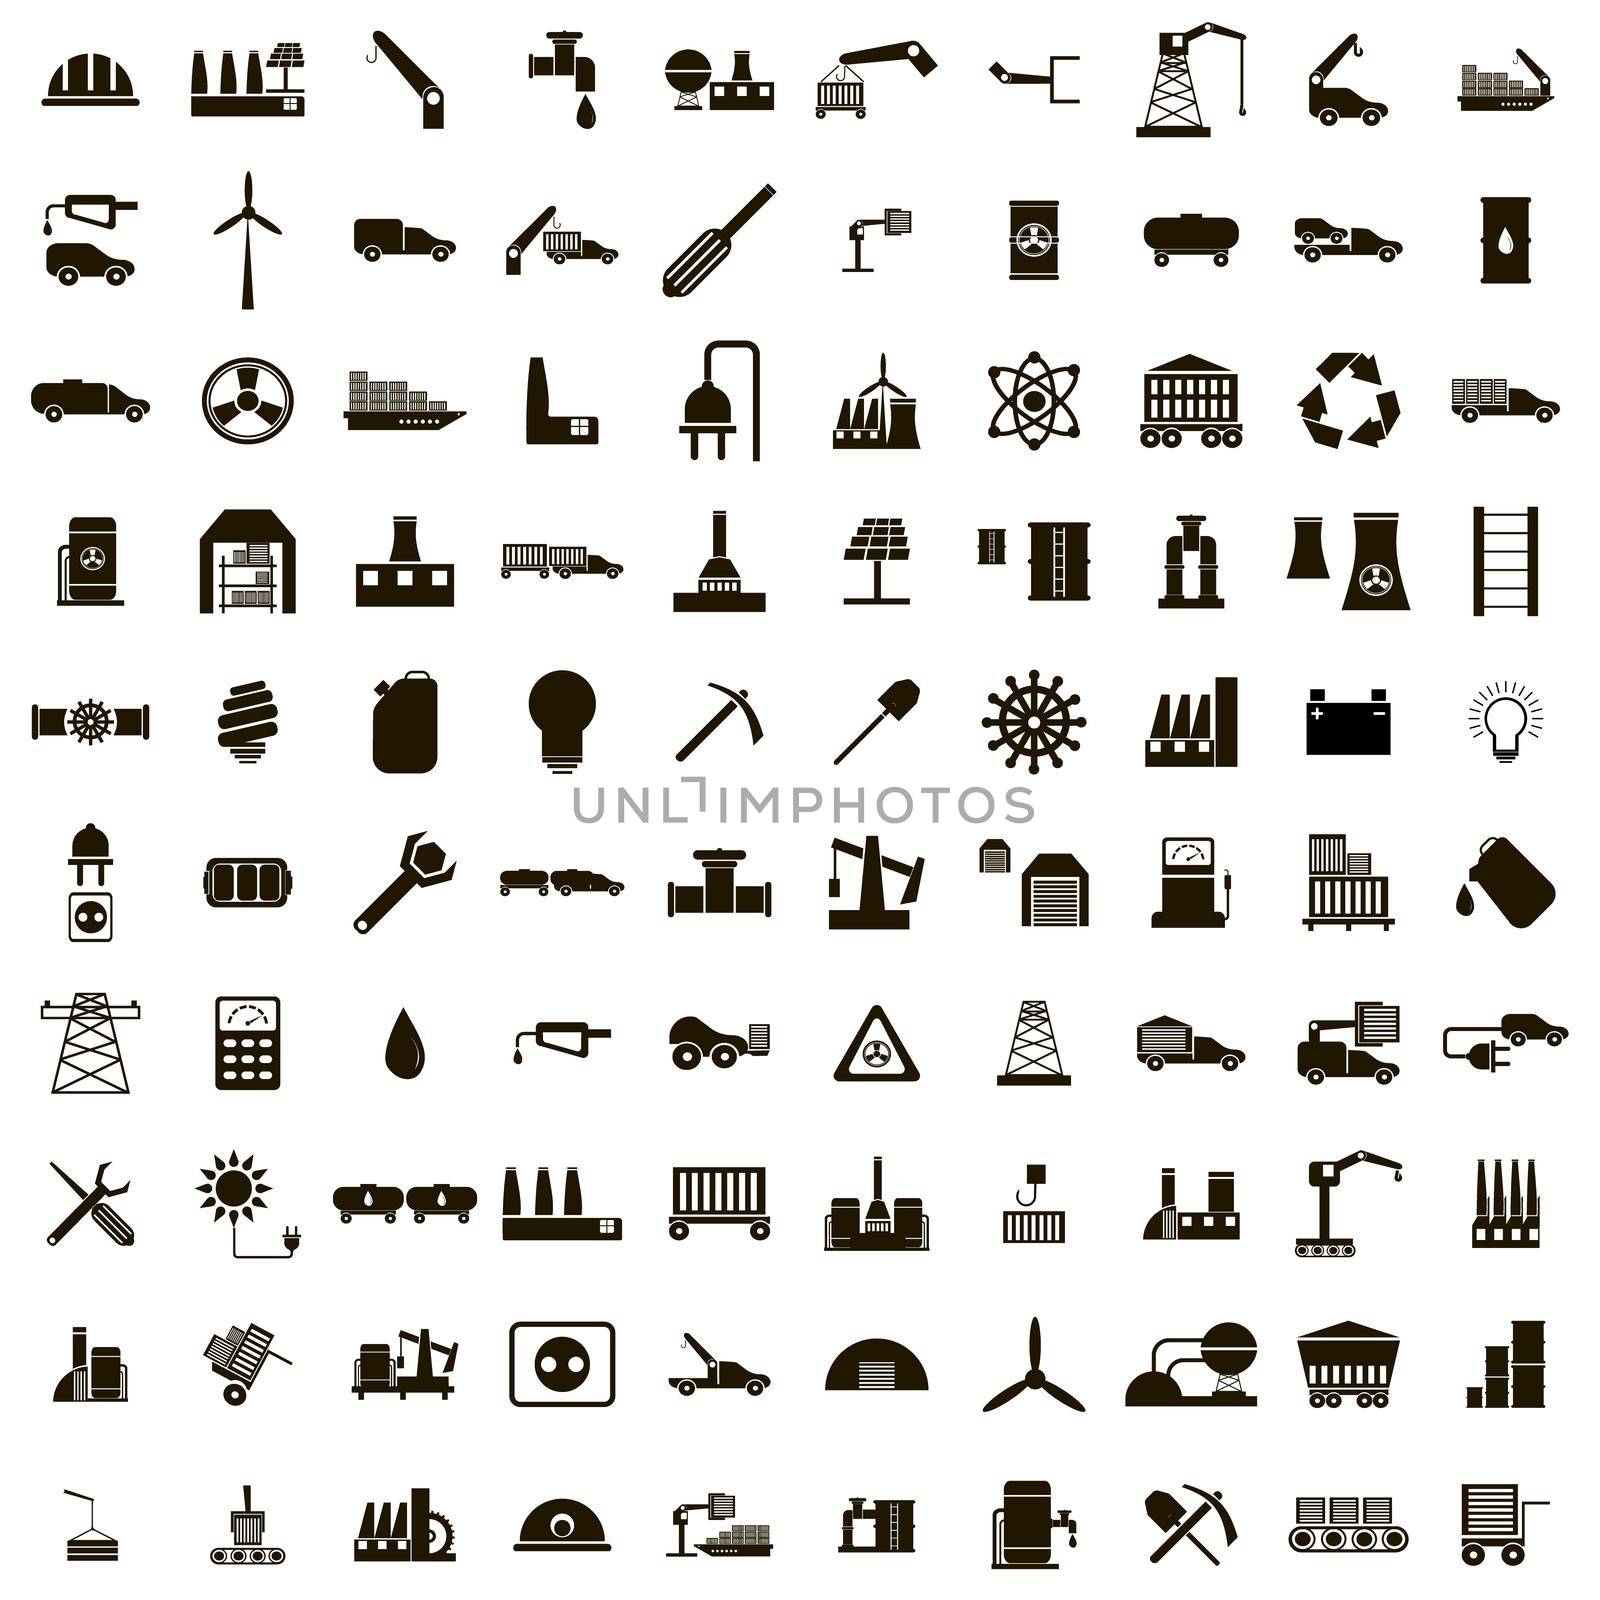 100 Industry icons set by ylivdesign